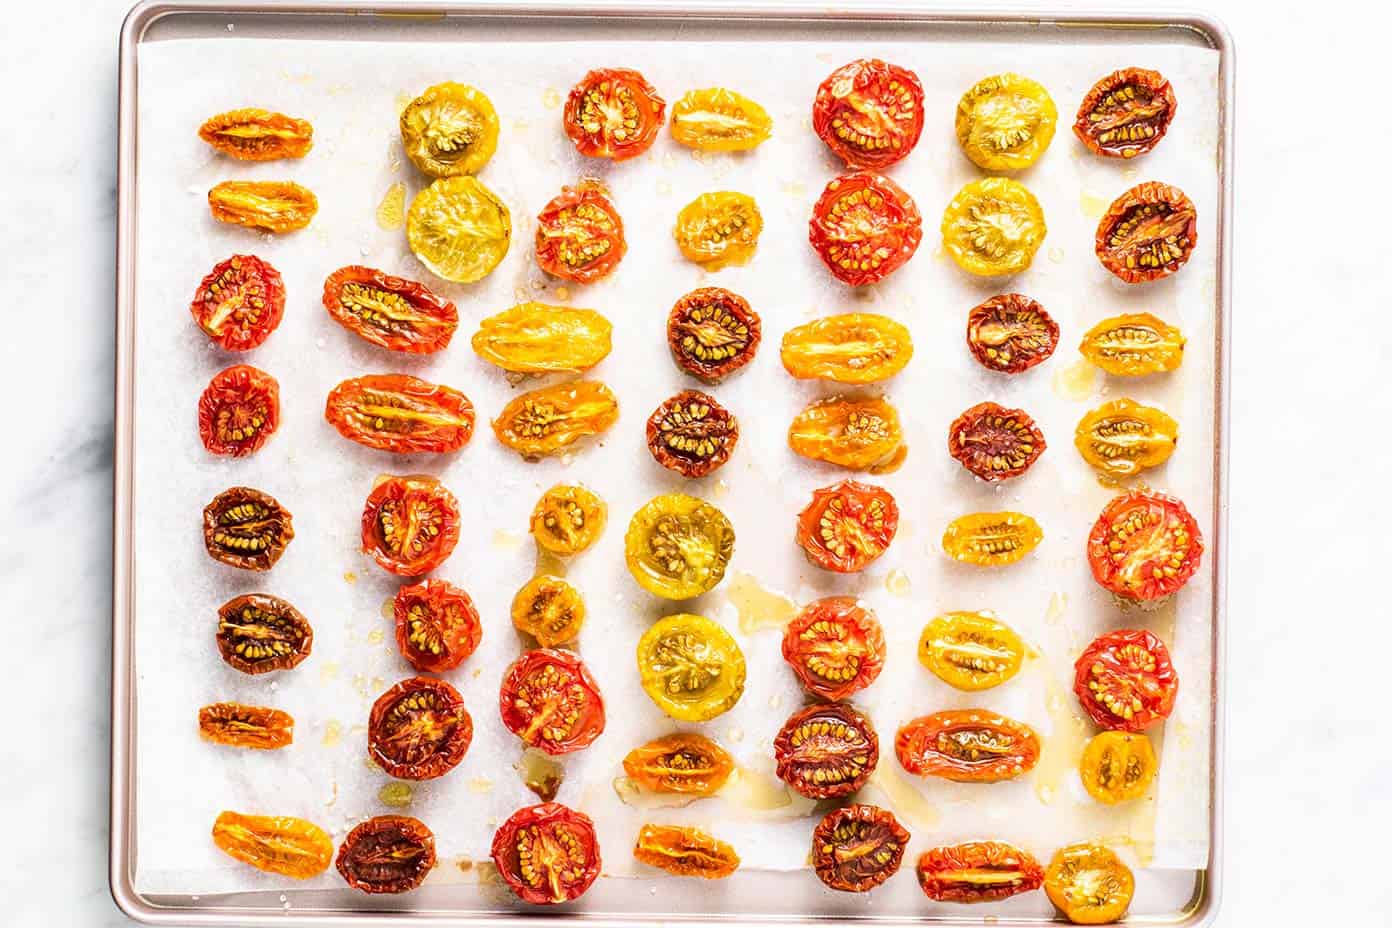 How To Make Sun Dried Tomatoes (With Step By Step Instructions